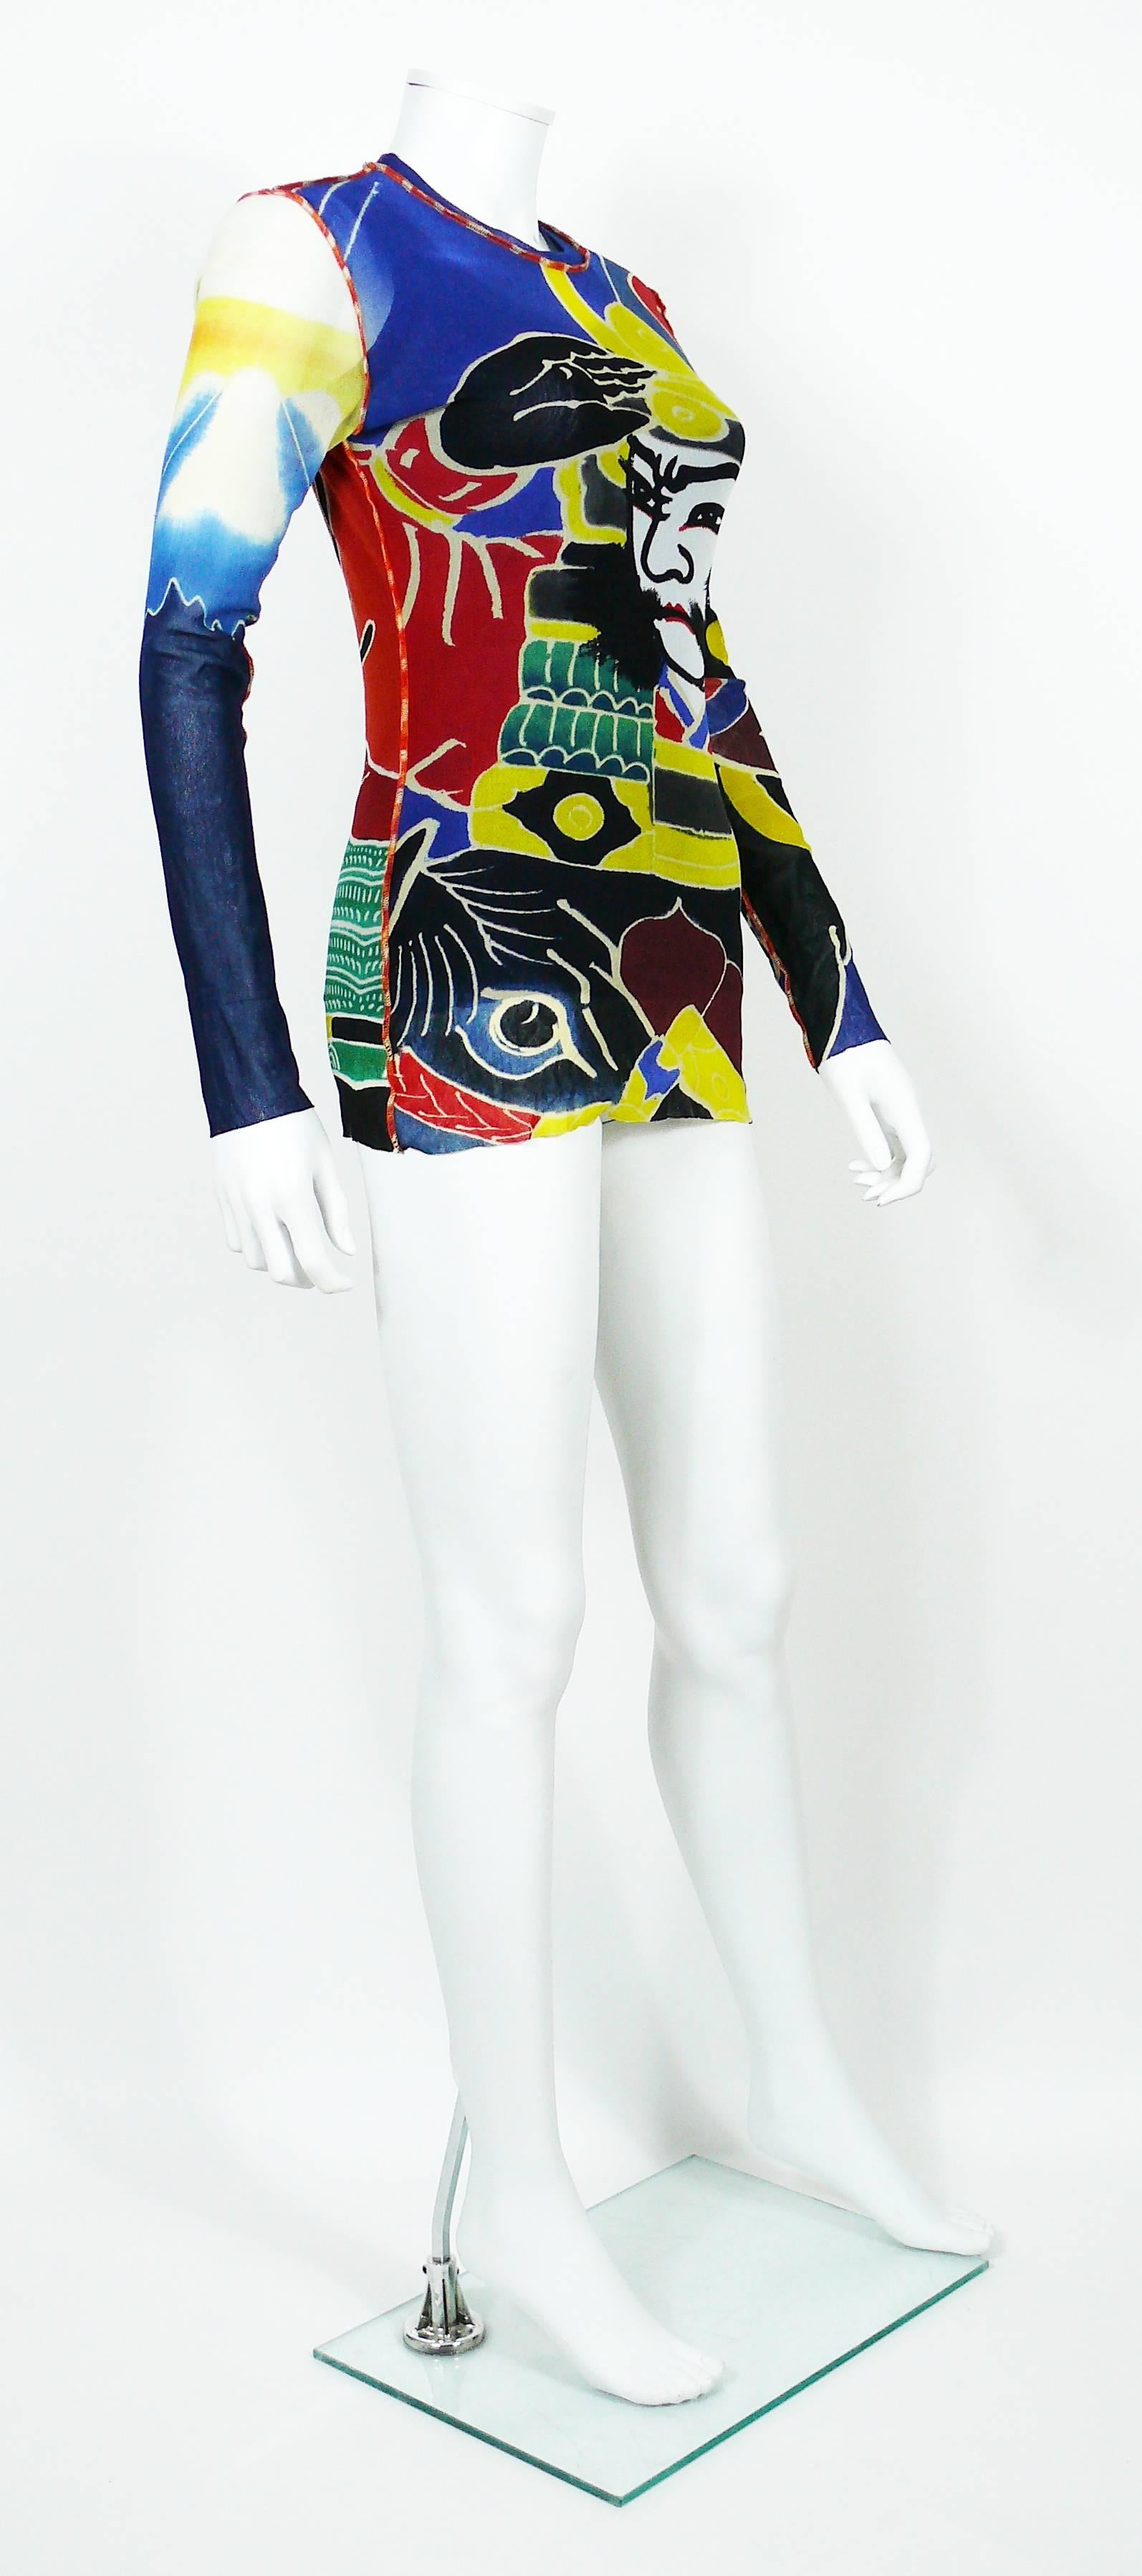 JEAN PAUL GAULTIER Maille vintage unisex sheer mesh nylon top featuring a gorgeous Japanese colorful print tattoo design.
Including a blue sheer mesh tank top (that you can wear alone or together with the Japanese print top - as shown on photos